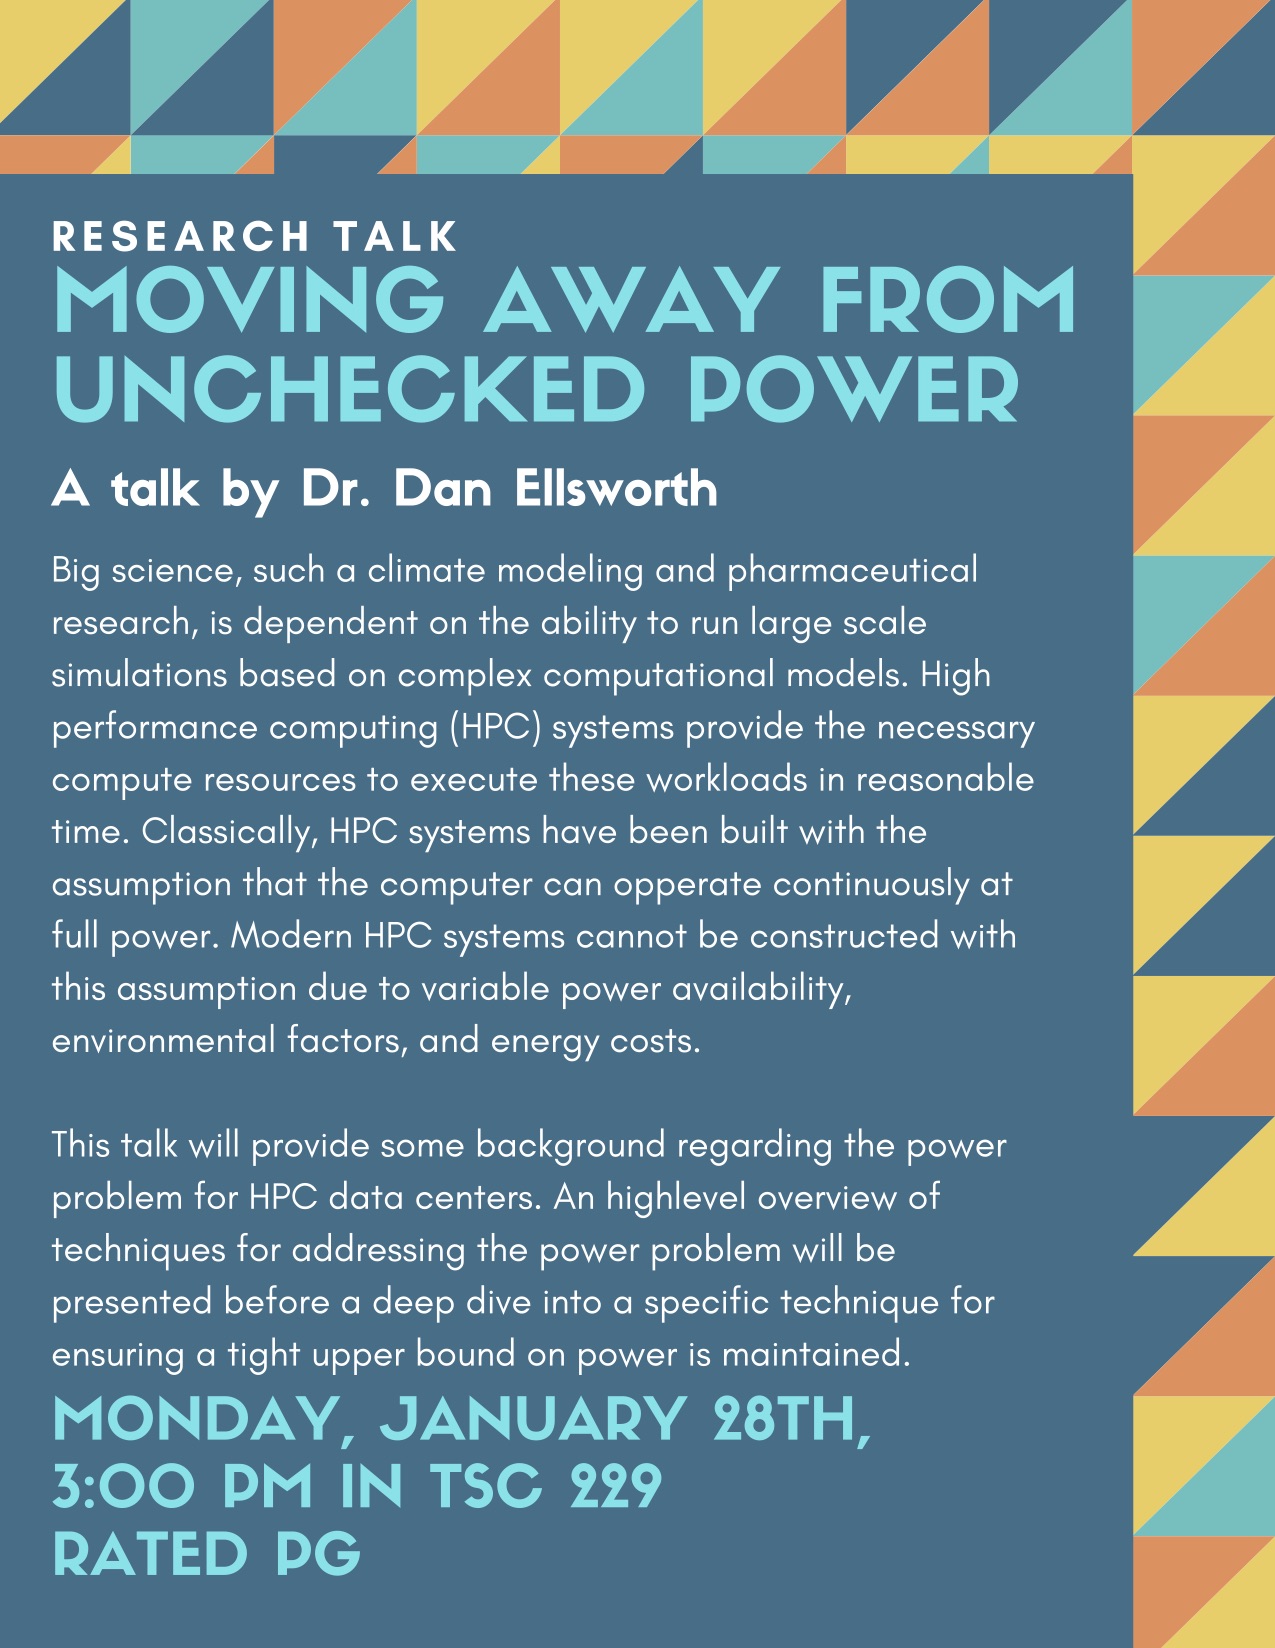 Jan 28 - Moving away from unckecked power[2]